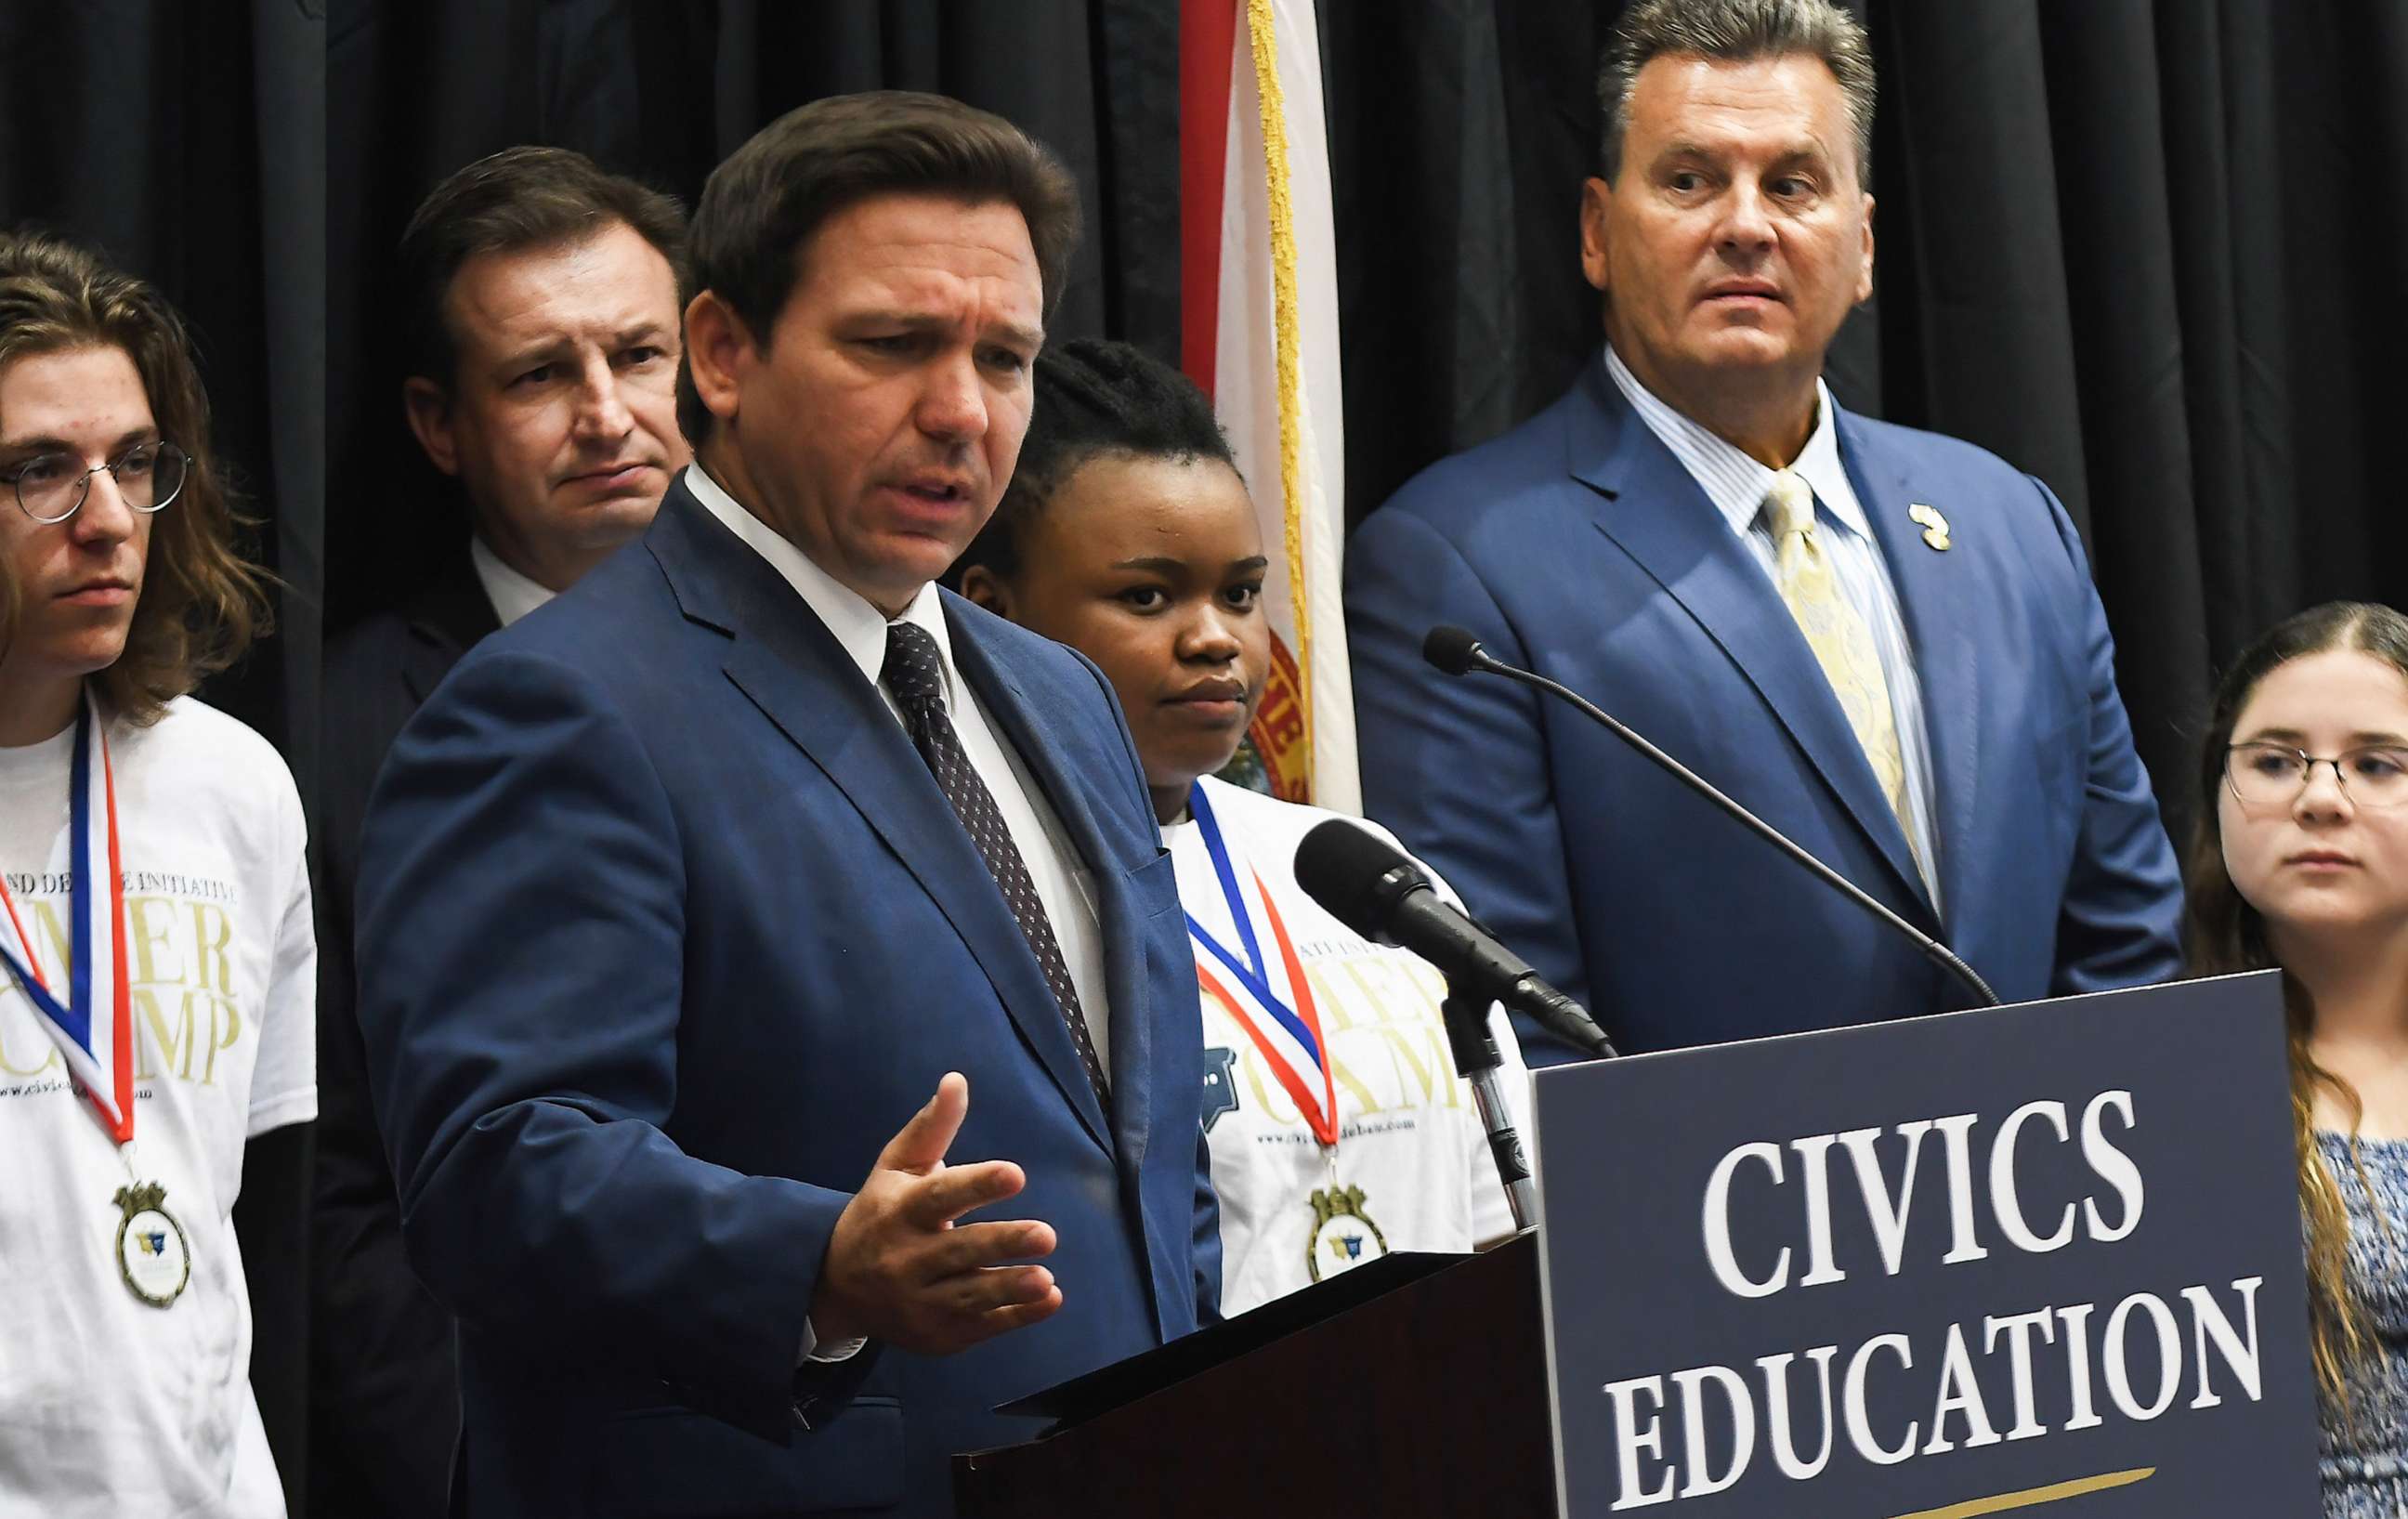 PHOTO: Florida Governor Ron DeSantis speaks at a press conference to discuss Florida's civics education initiative of unbiased history teachings at Crooms Academy of Information Technology in Sanford, Fla., on June 30, 2022.